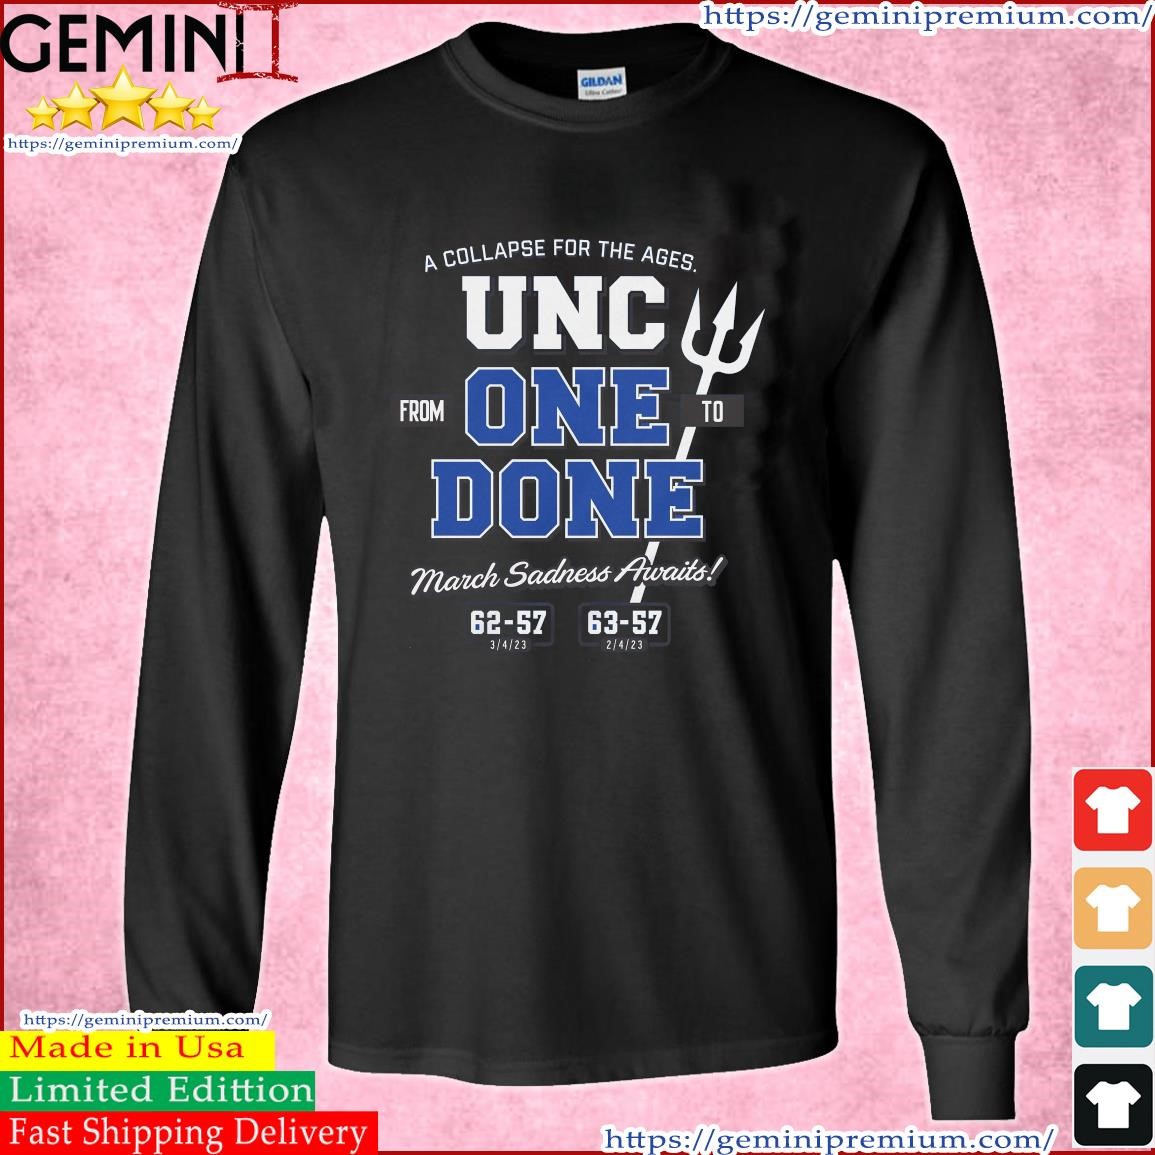 Duke Blue Devils From One To Done March Sadness Awaits Shirt Long Sleeve Tee.jpg